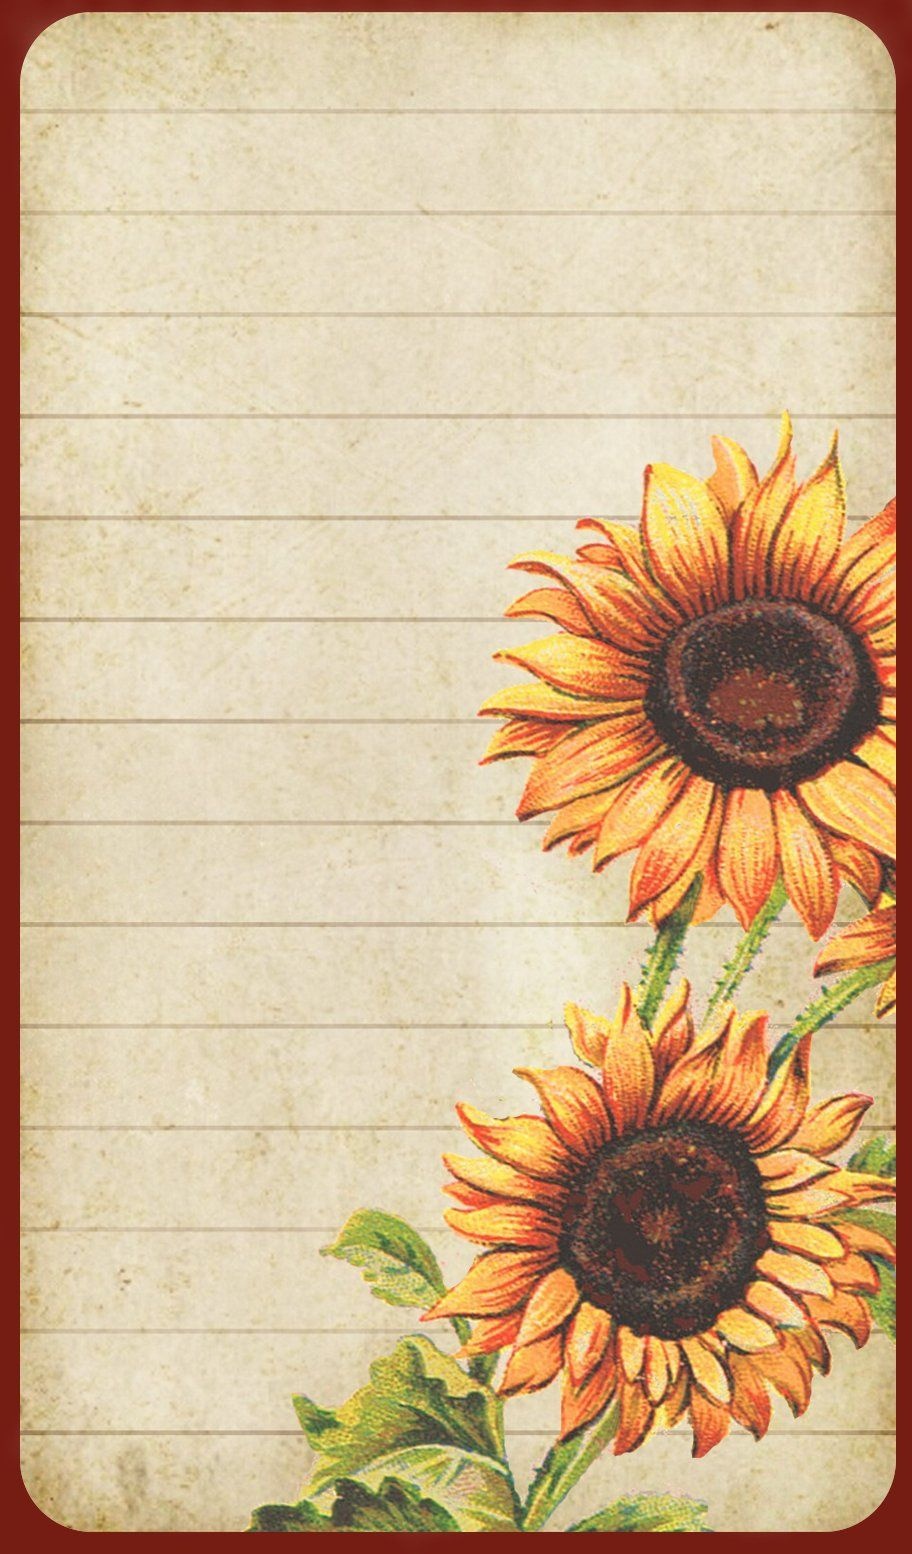 Sunflowers: Free Printable Labels, Recipe Card, Note Paper, Etc - Free Printable Sunflower Stationery